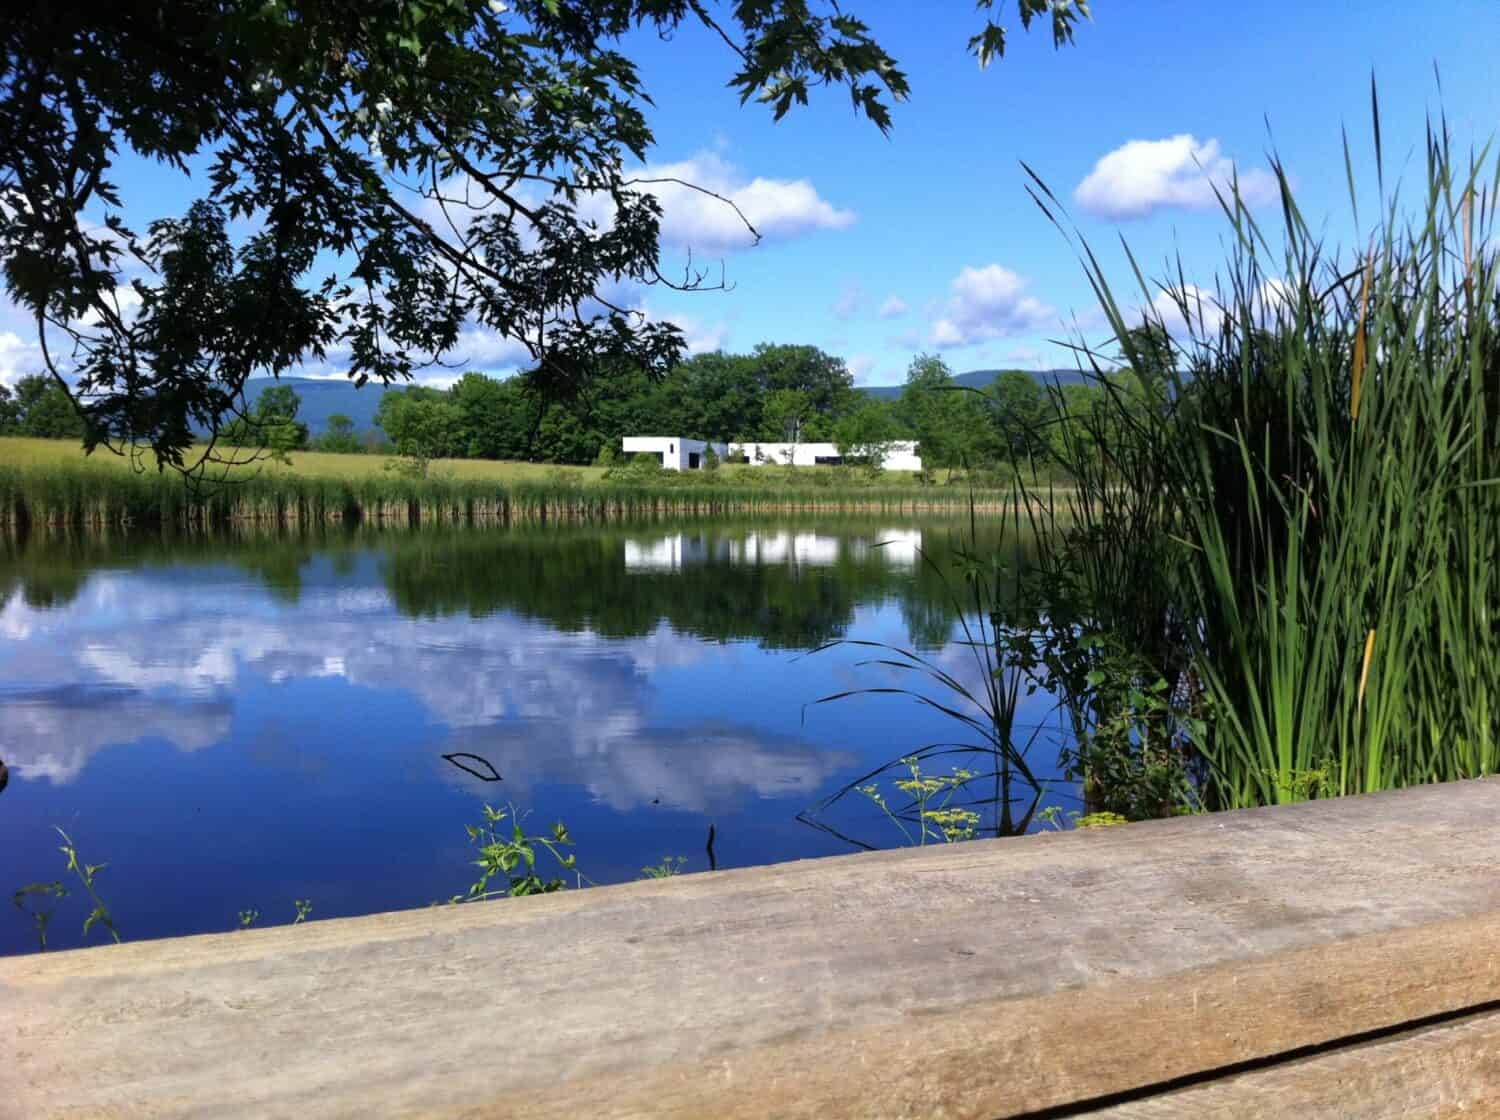 Center for the Advancement of Public Action at Bennington College reflected in Pond